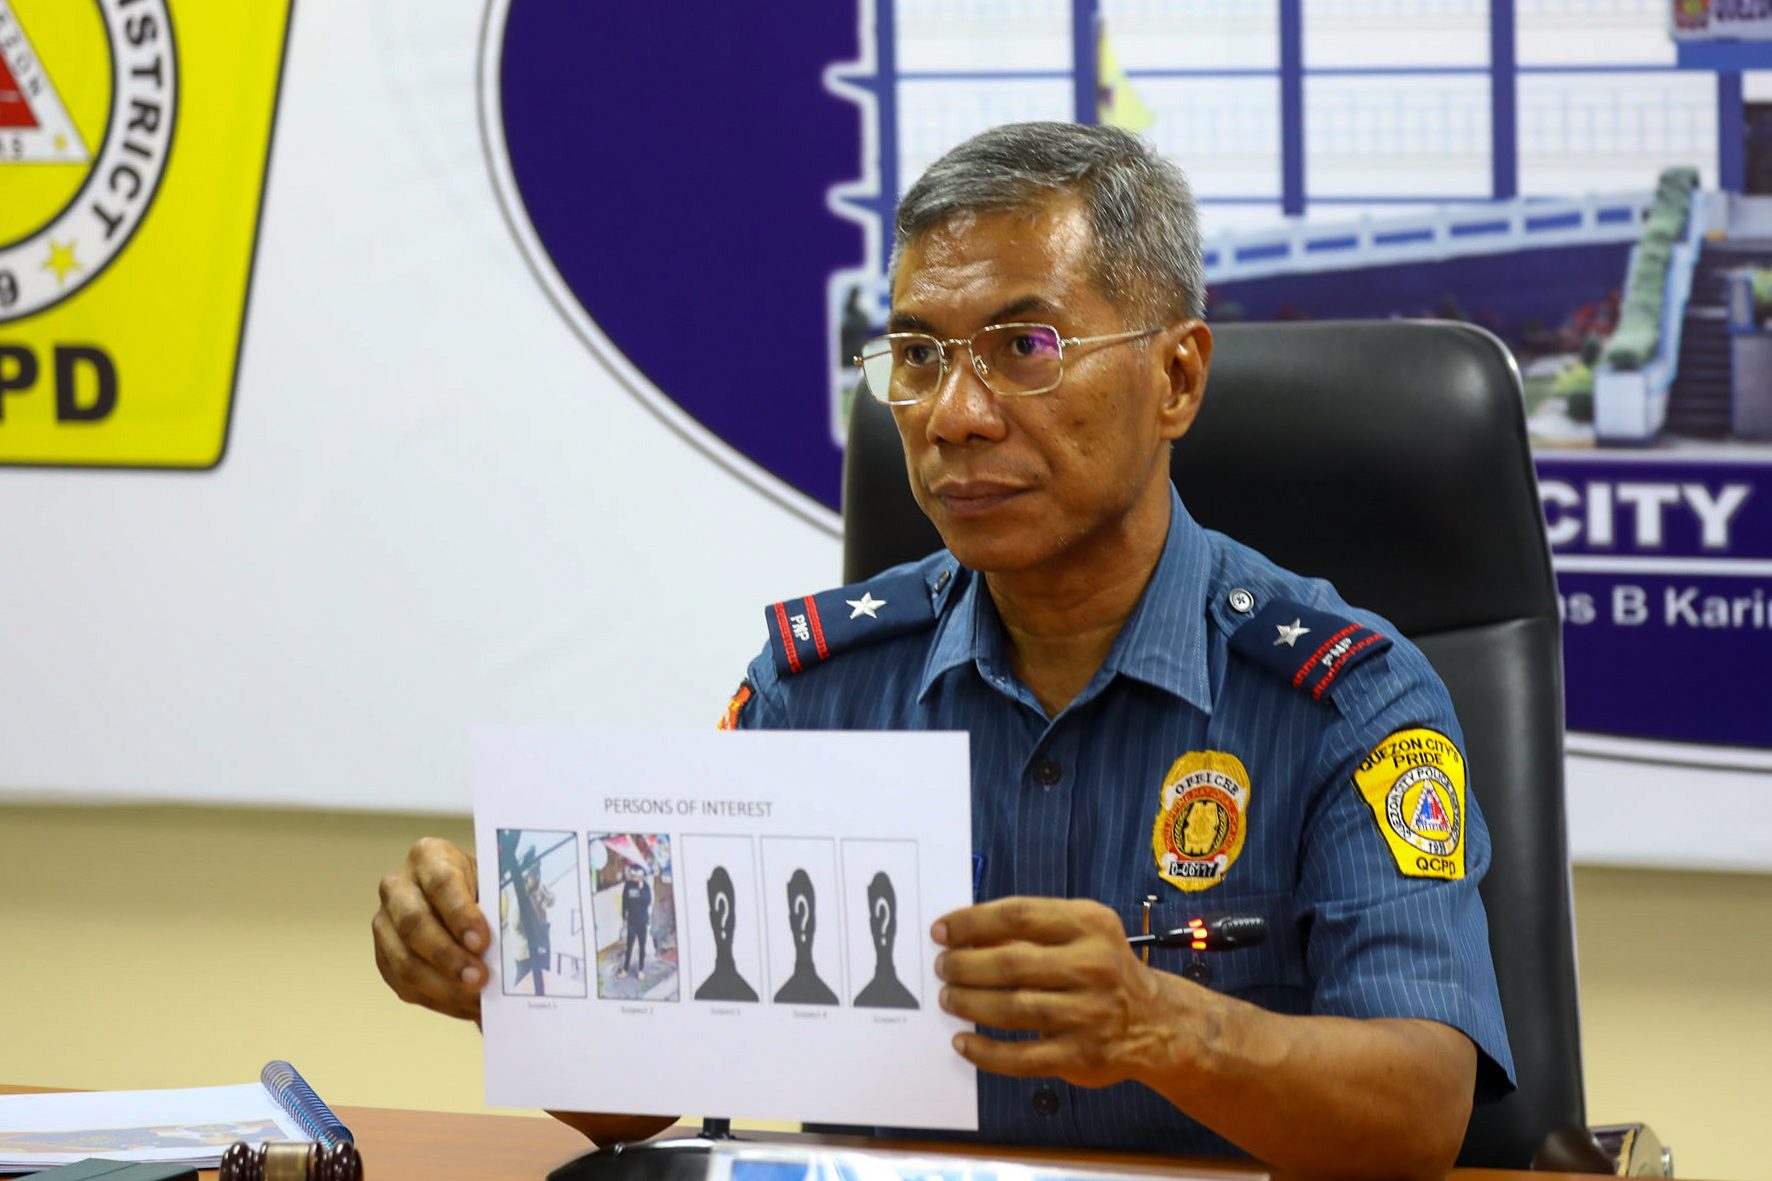 QCPD chief resigns amid road rage controversy